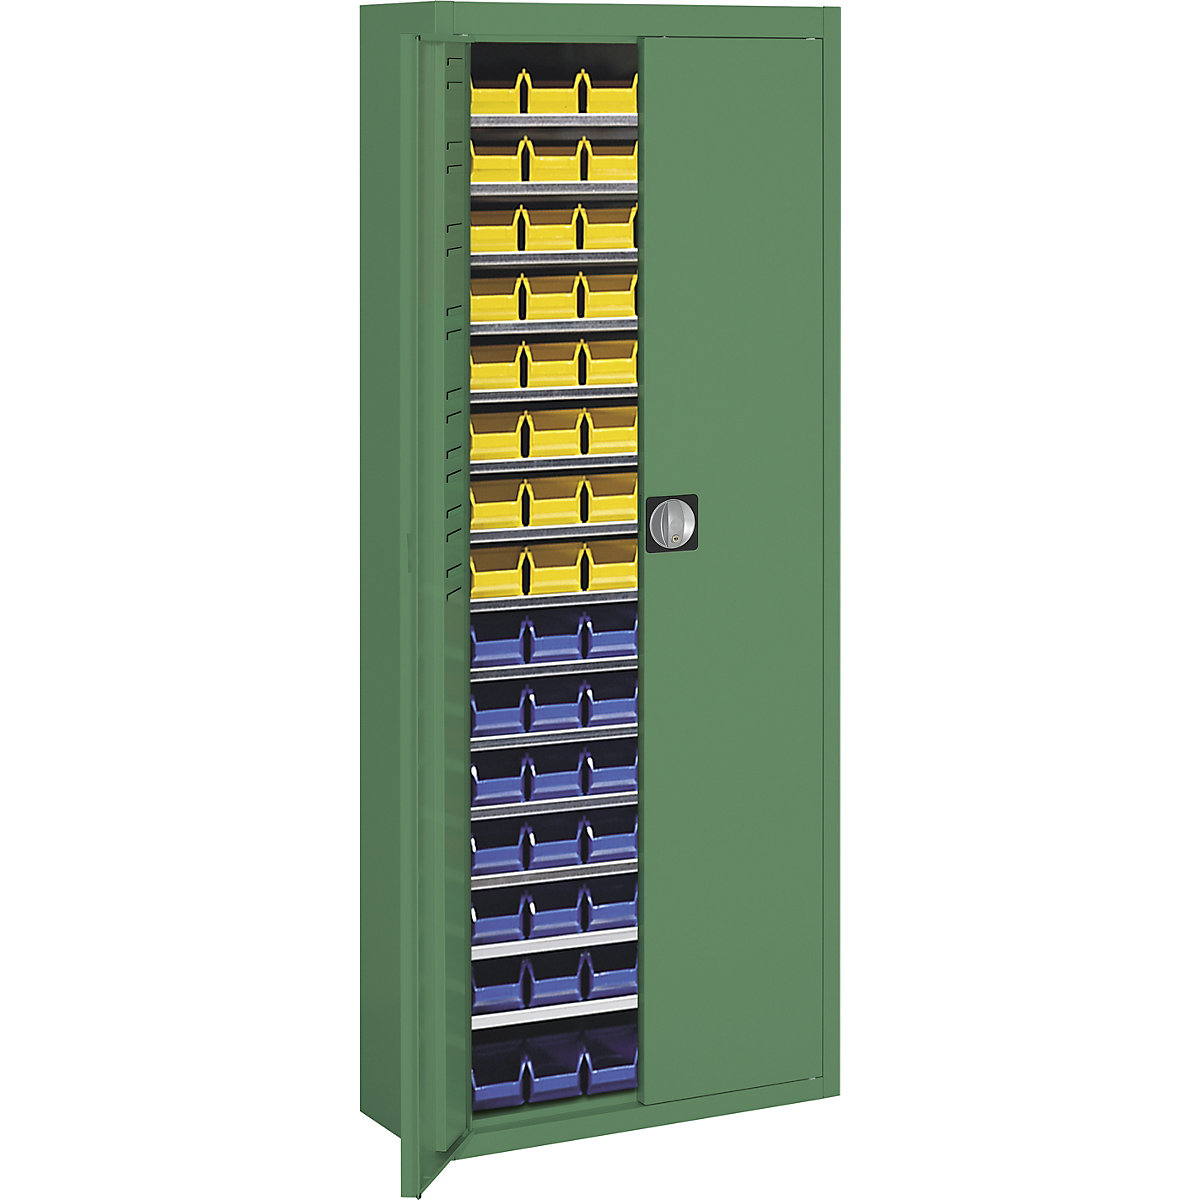 Storage cupboard with open fronted storage bins – mauser, HxWxD 1740 x 680 x 280 mm, single colour, green, 90 bins-13